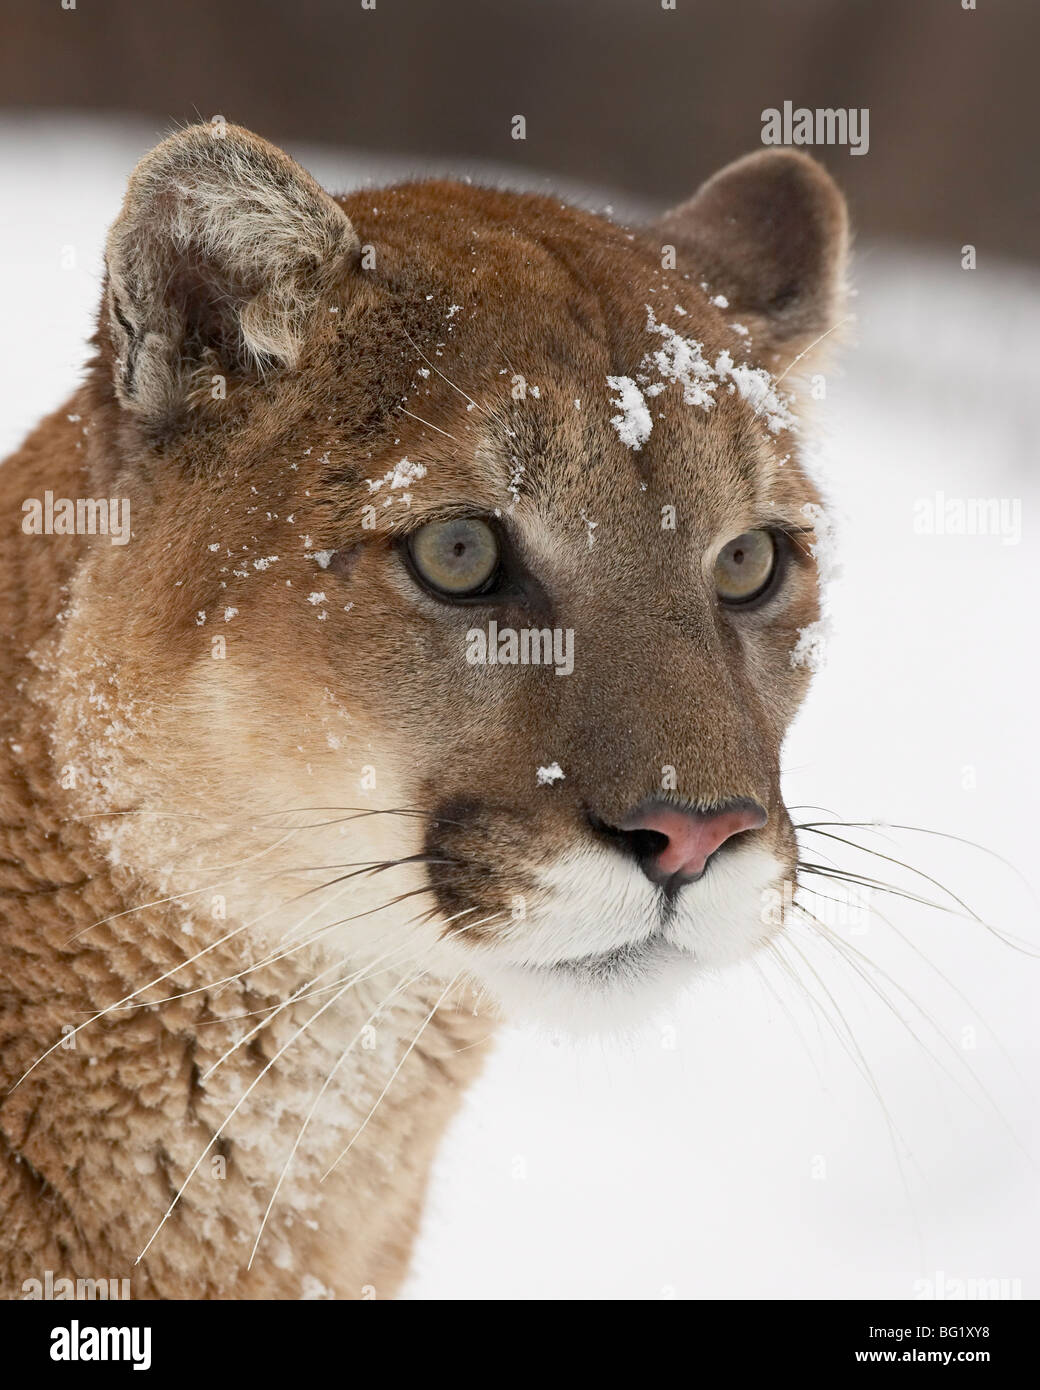 mountain lions in north america